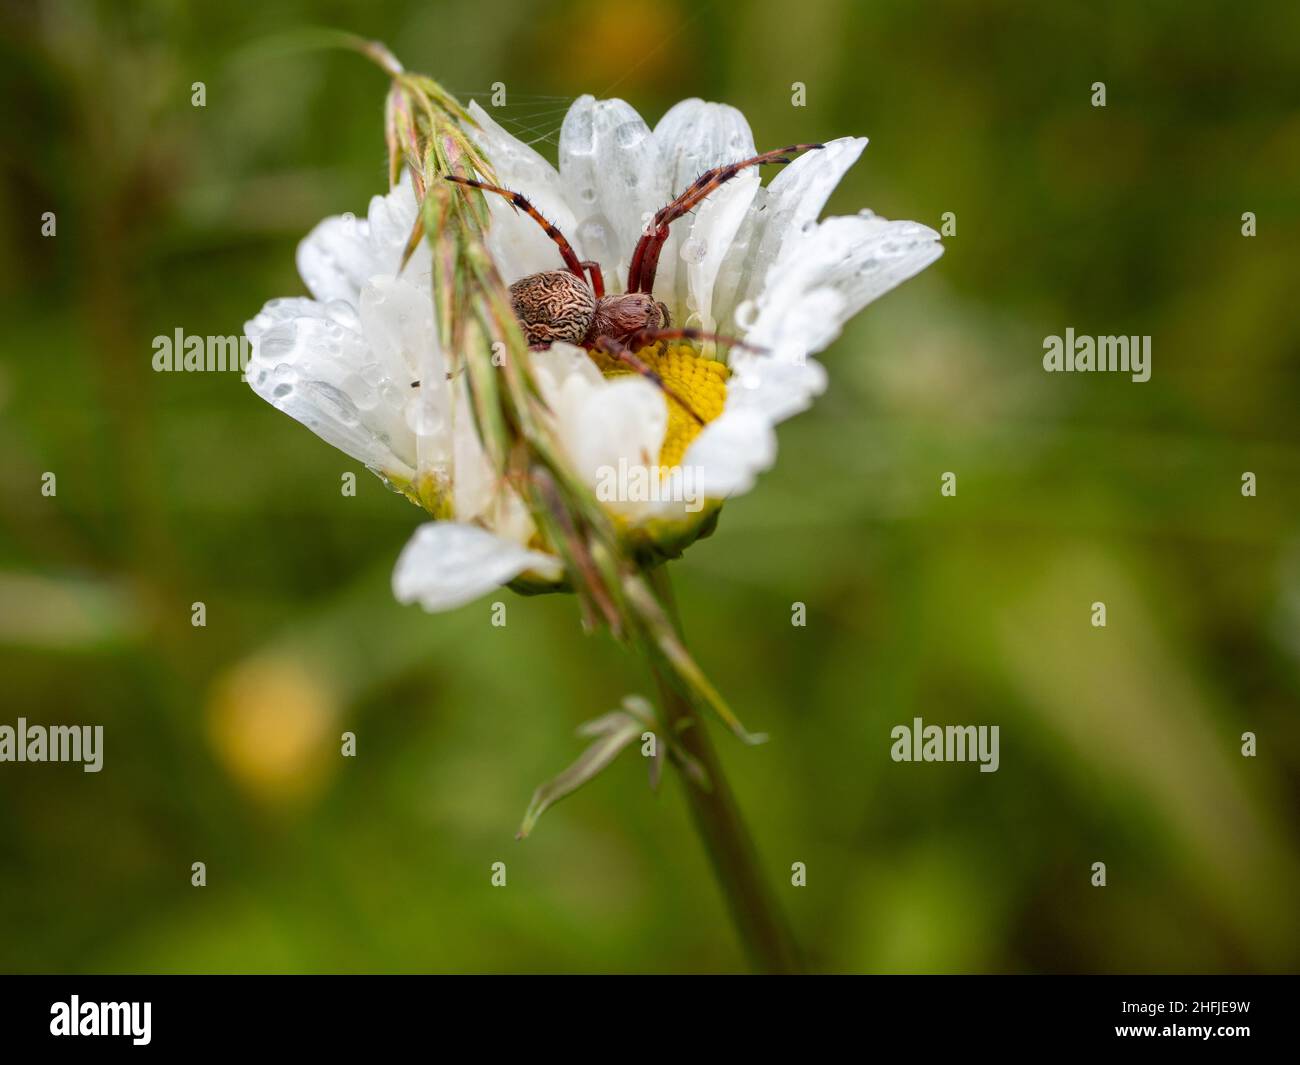 Australian Golden Orb Weaver spider perched on a white Ox-eye daisy Stock Photo